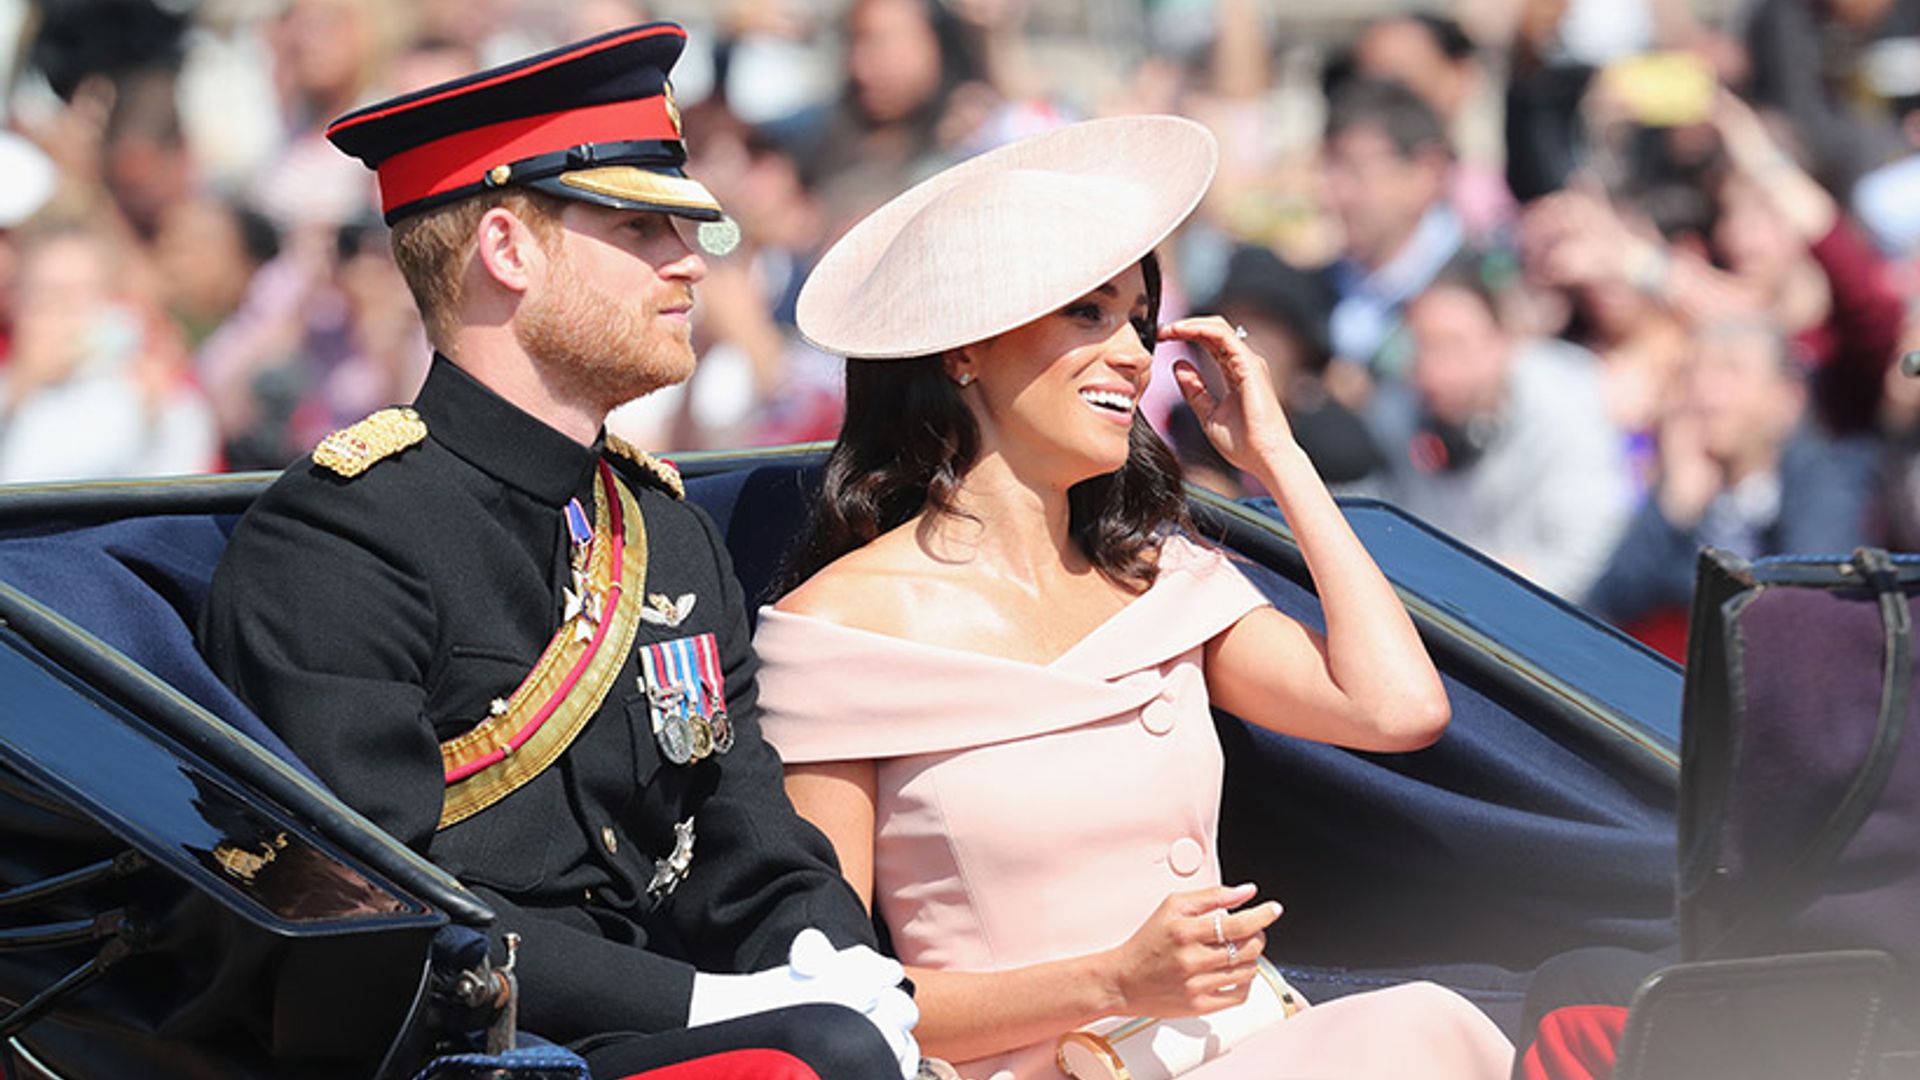 meghan markle trooping the colour